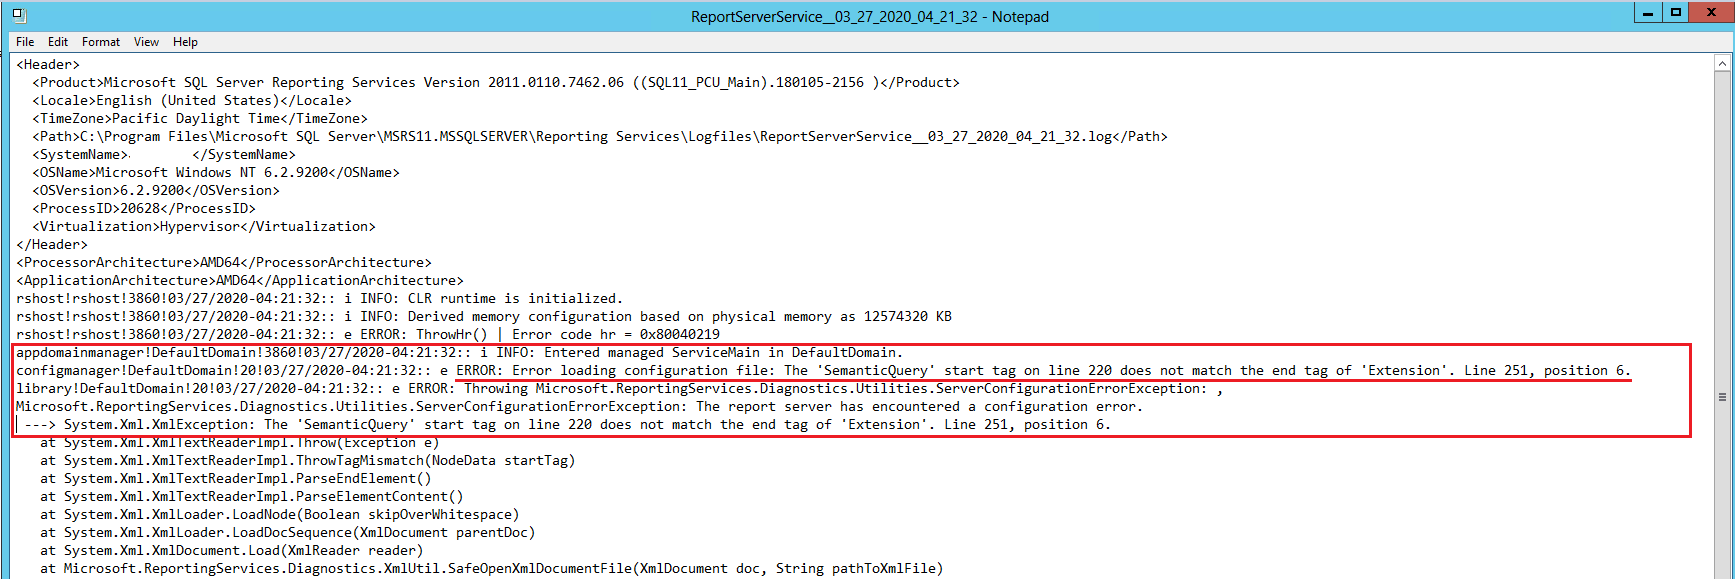 Event id 133 from source report server cannot be found